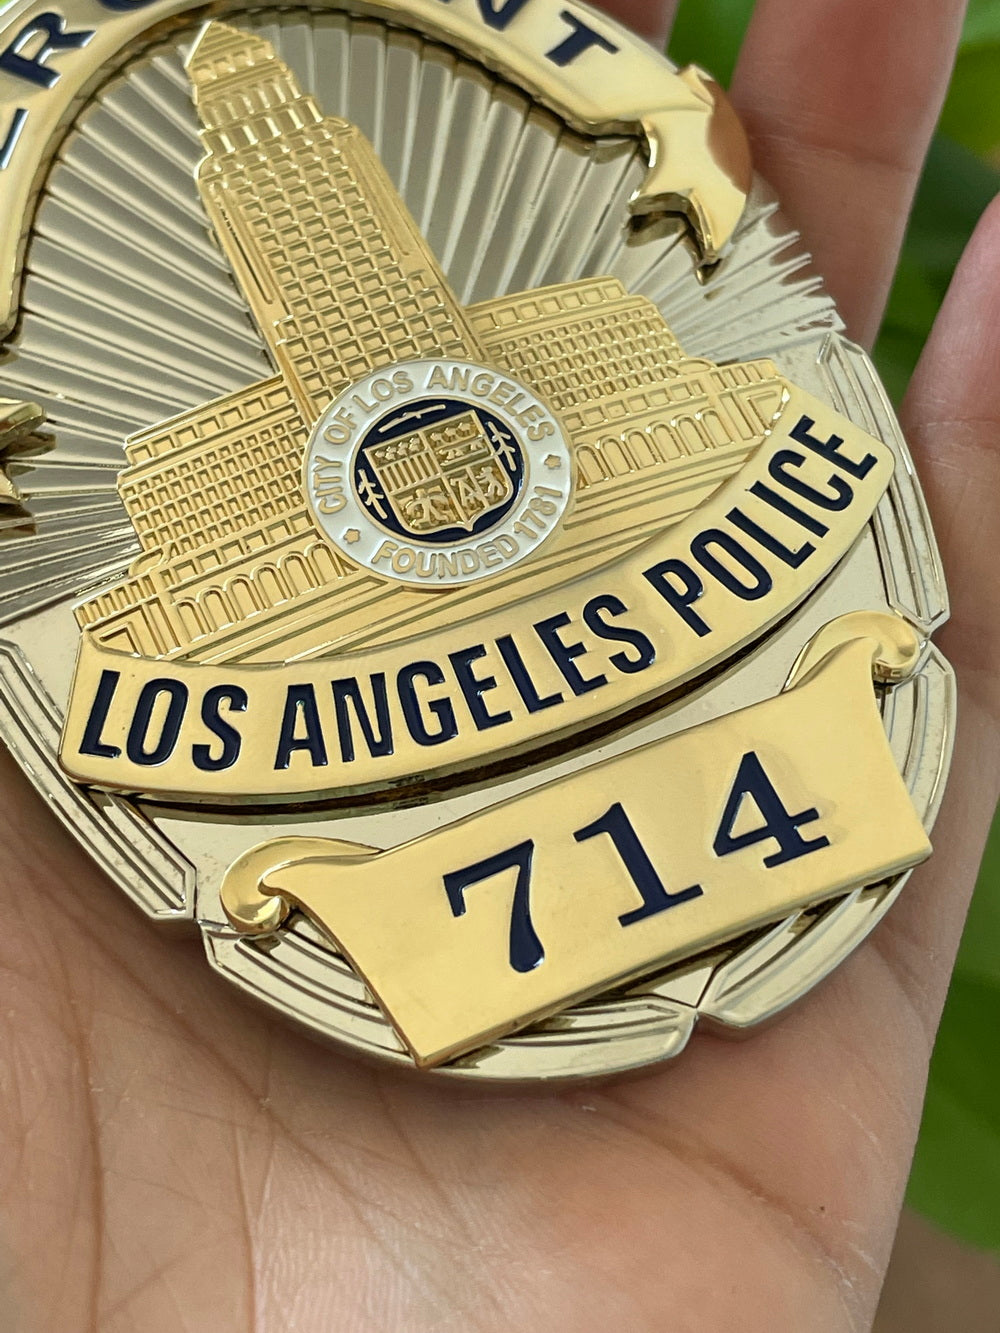 LAPD Police Officer #54928 Los Angeles Police Badge Replica Movie Props